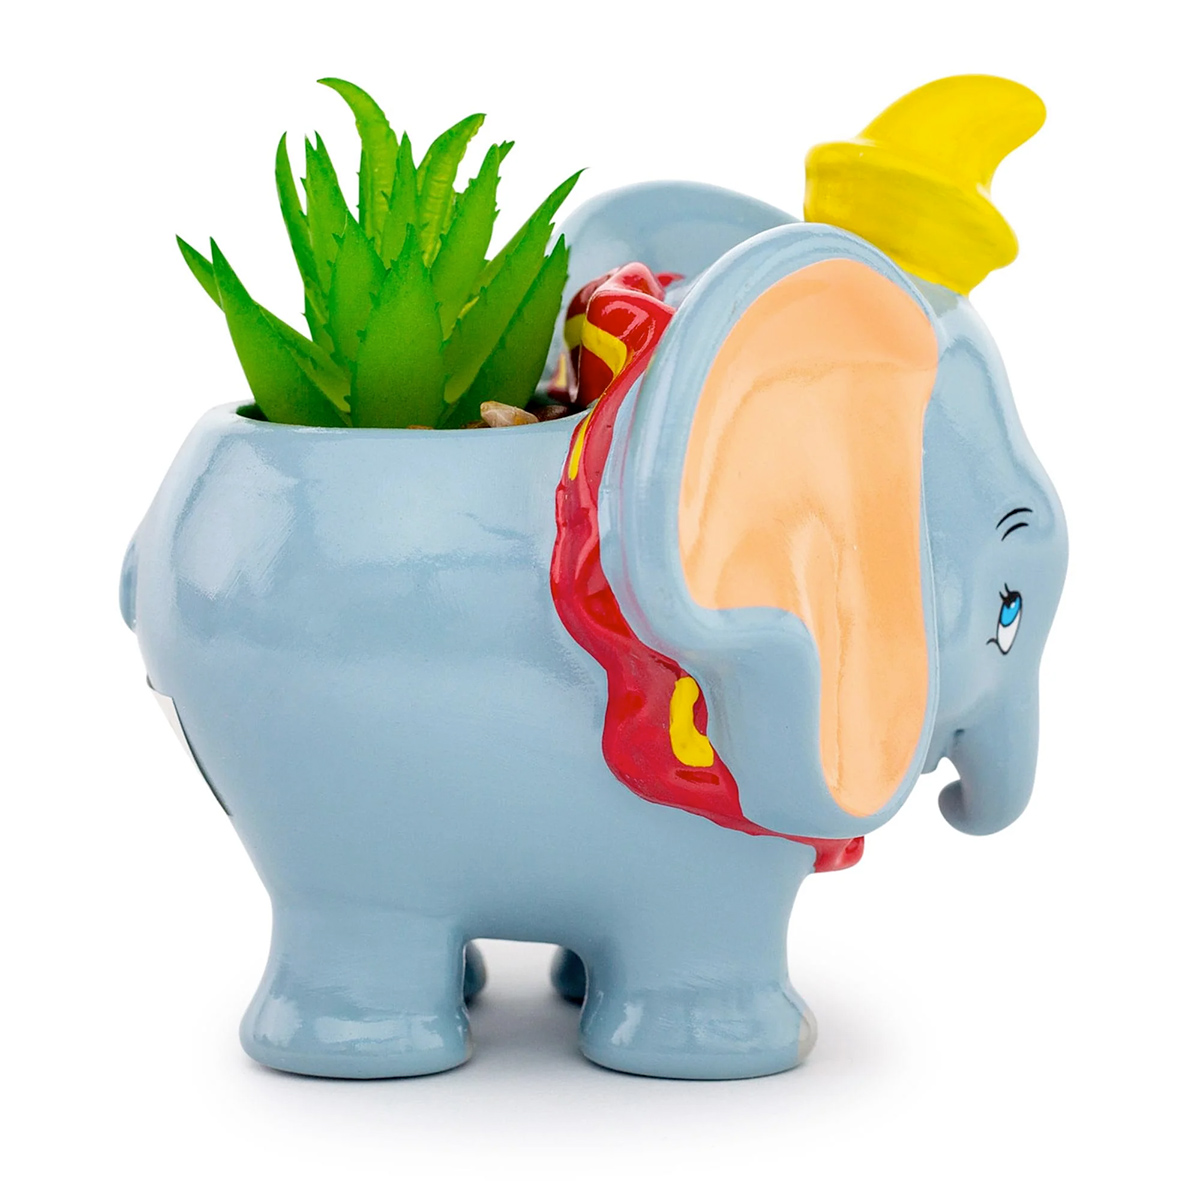 Mini Potted Plant Dumbo with Artificial Succulent